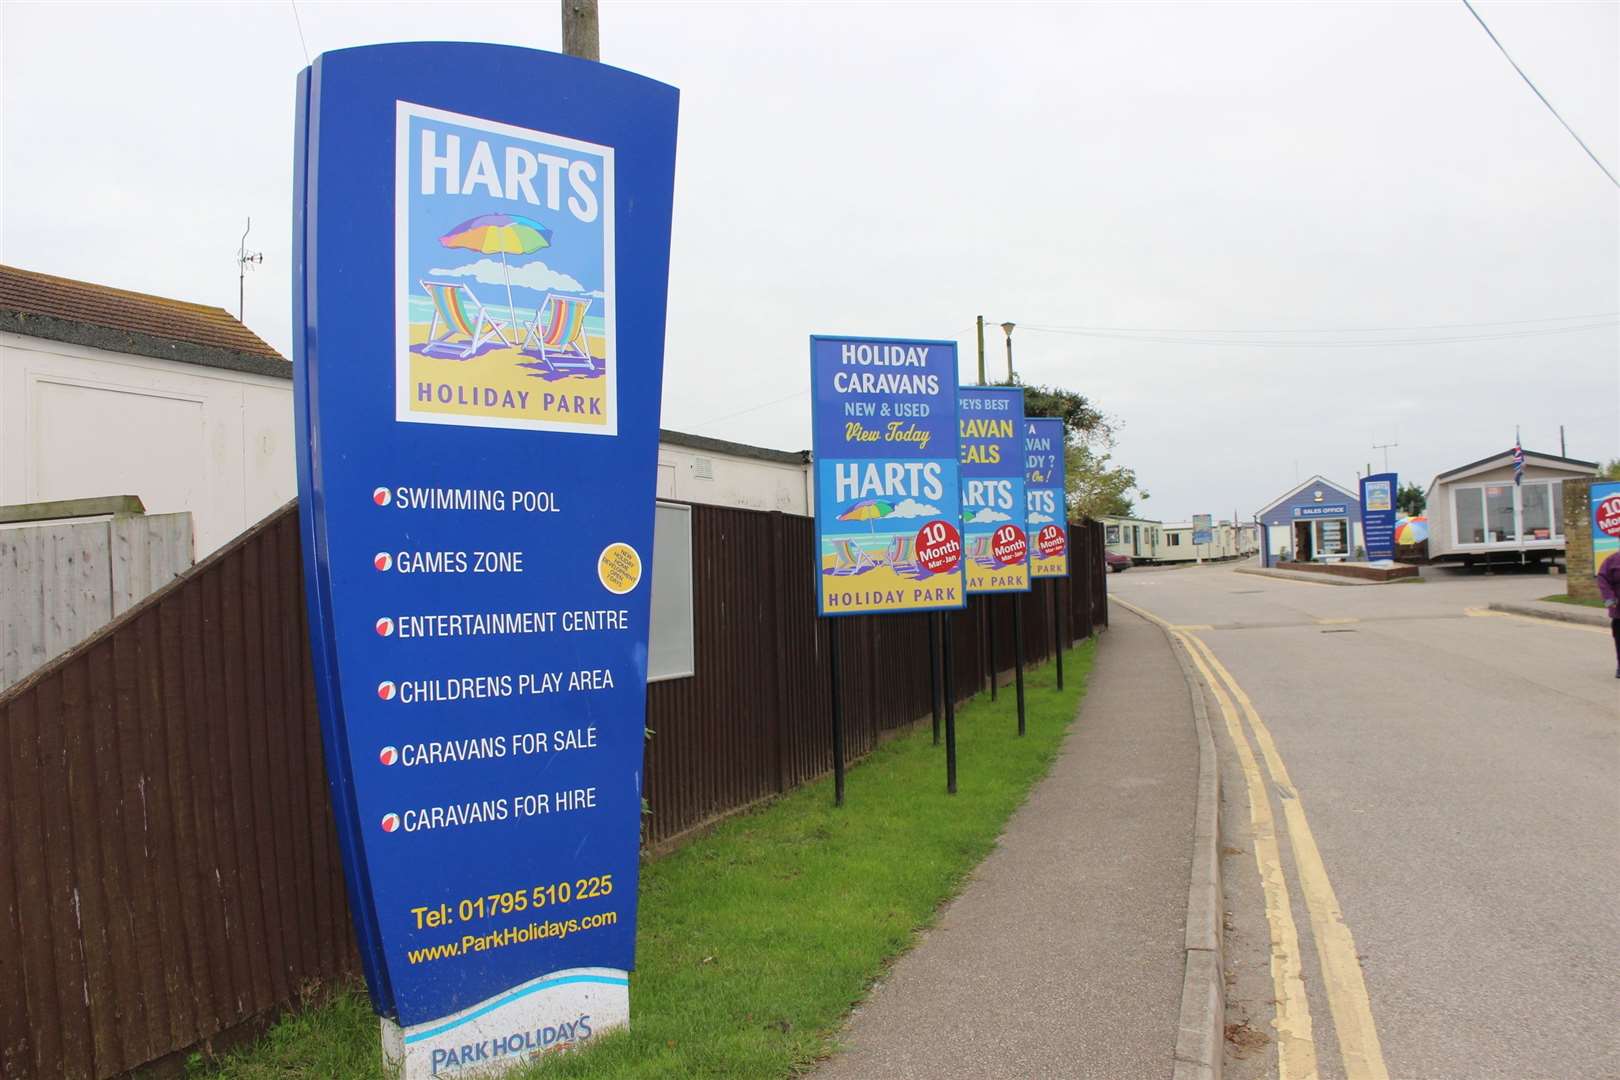 Harts holiday park at Leysdown, Sheppey - one of the sites owned by Park Holidays